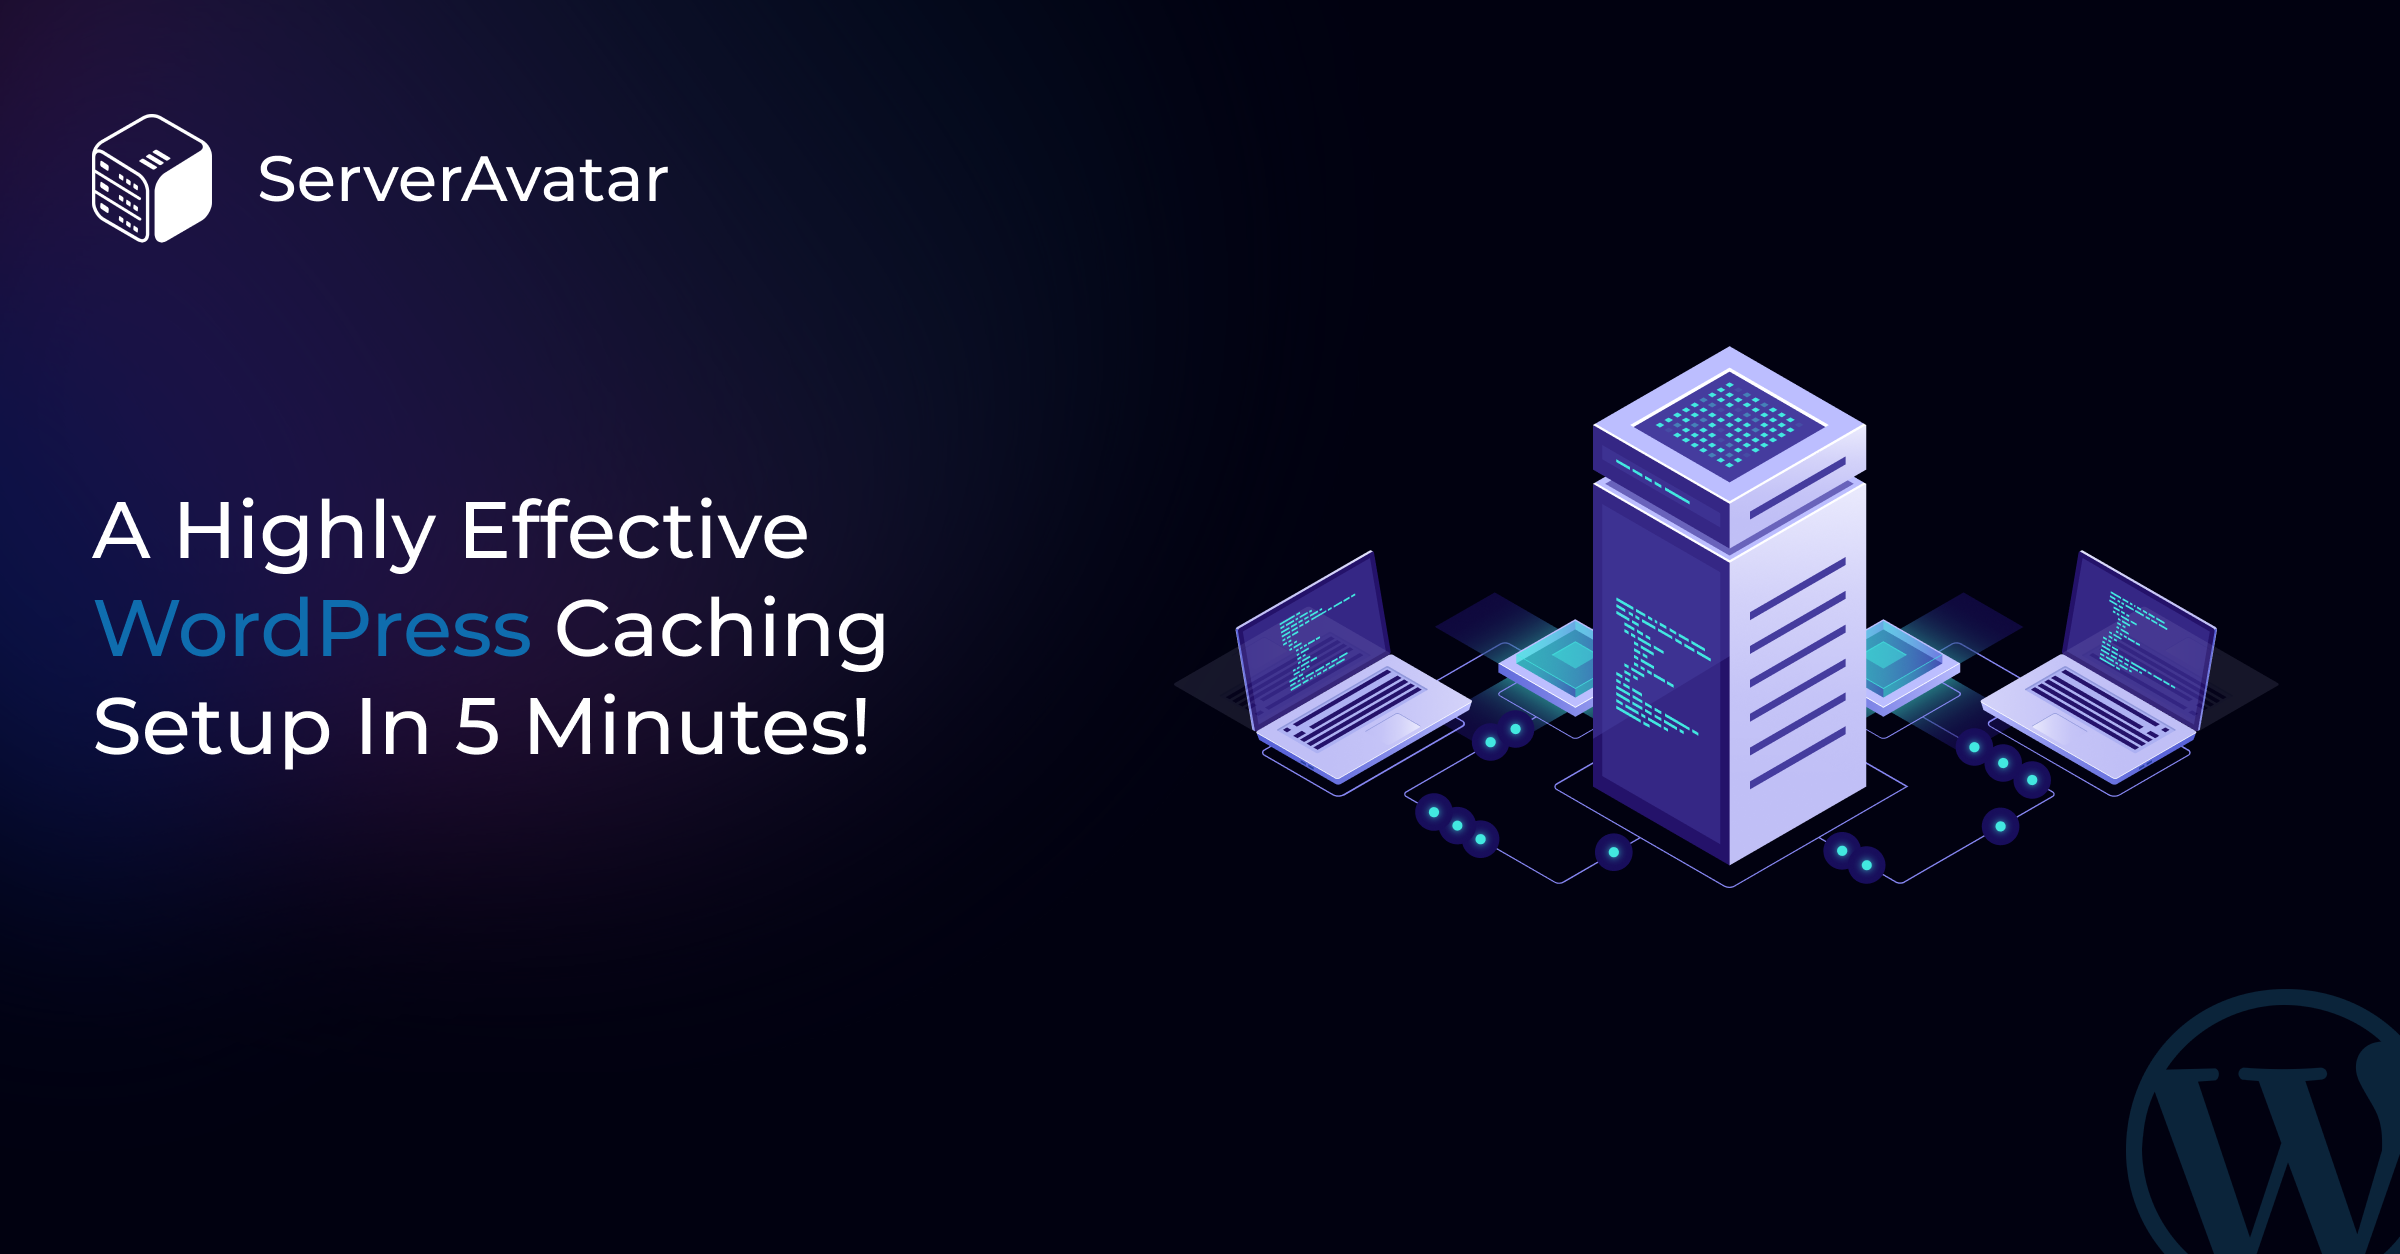 A Highly Effective WordPress Caching Setup in 5 minutes!